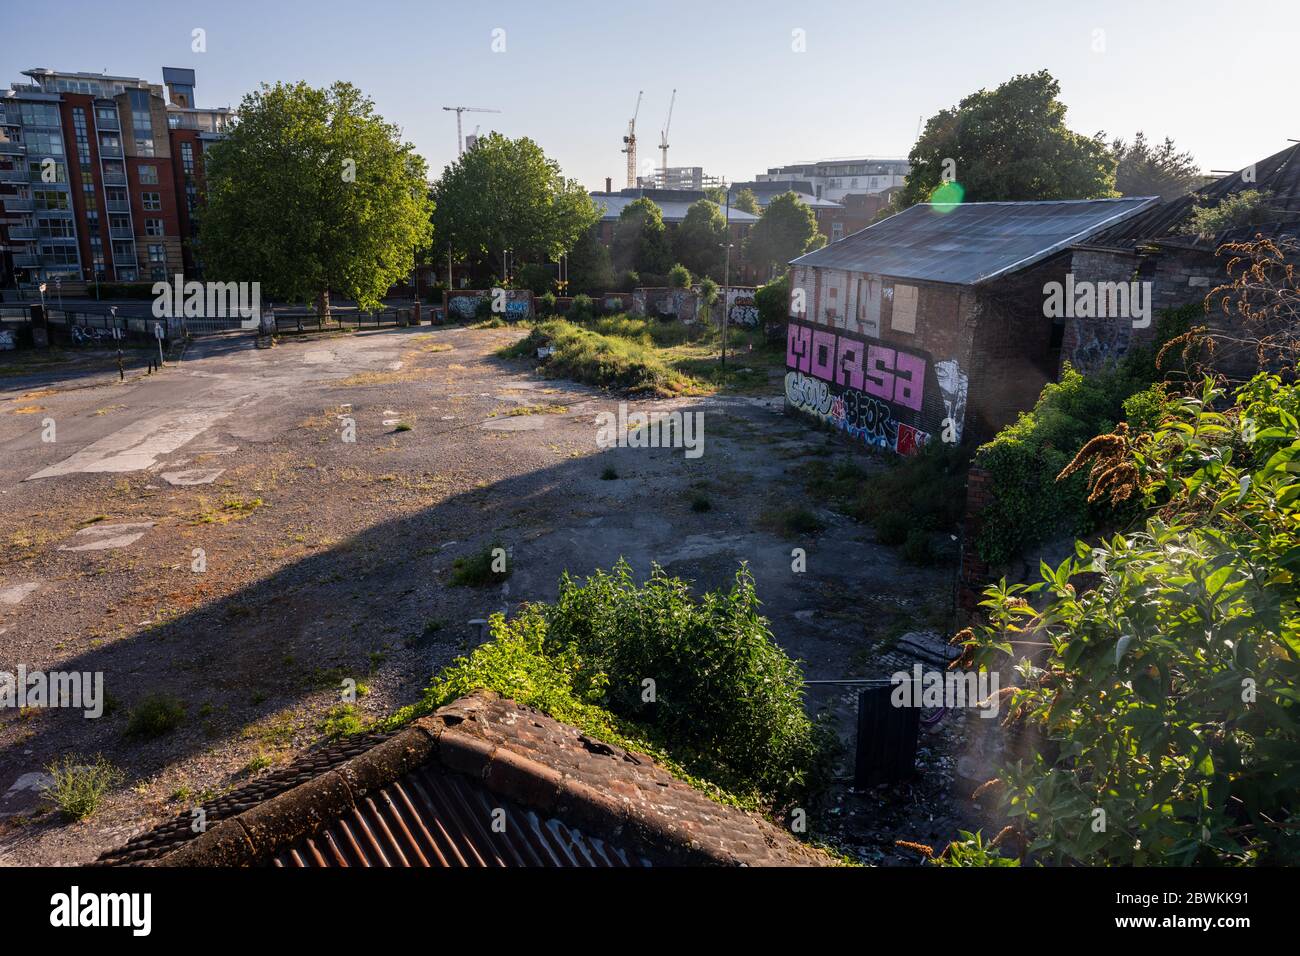 Bristol, England, UK - May 25, 2020: Dawn light falls on derelict buildings and an empty wasteground at Redcliffe Wharf, one of the last post-industri Stock Photo